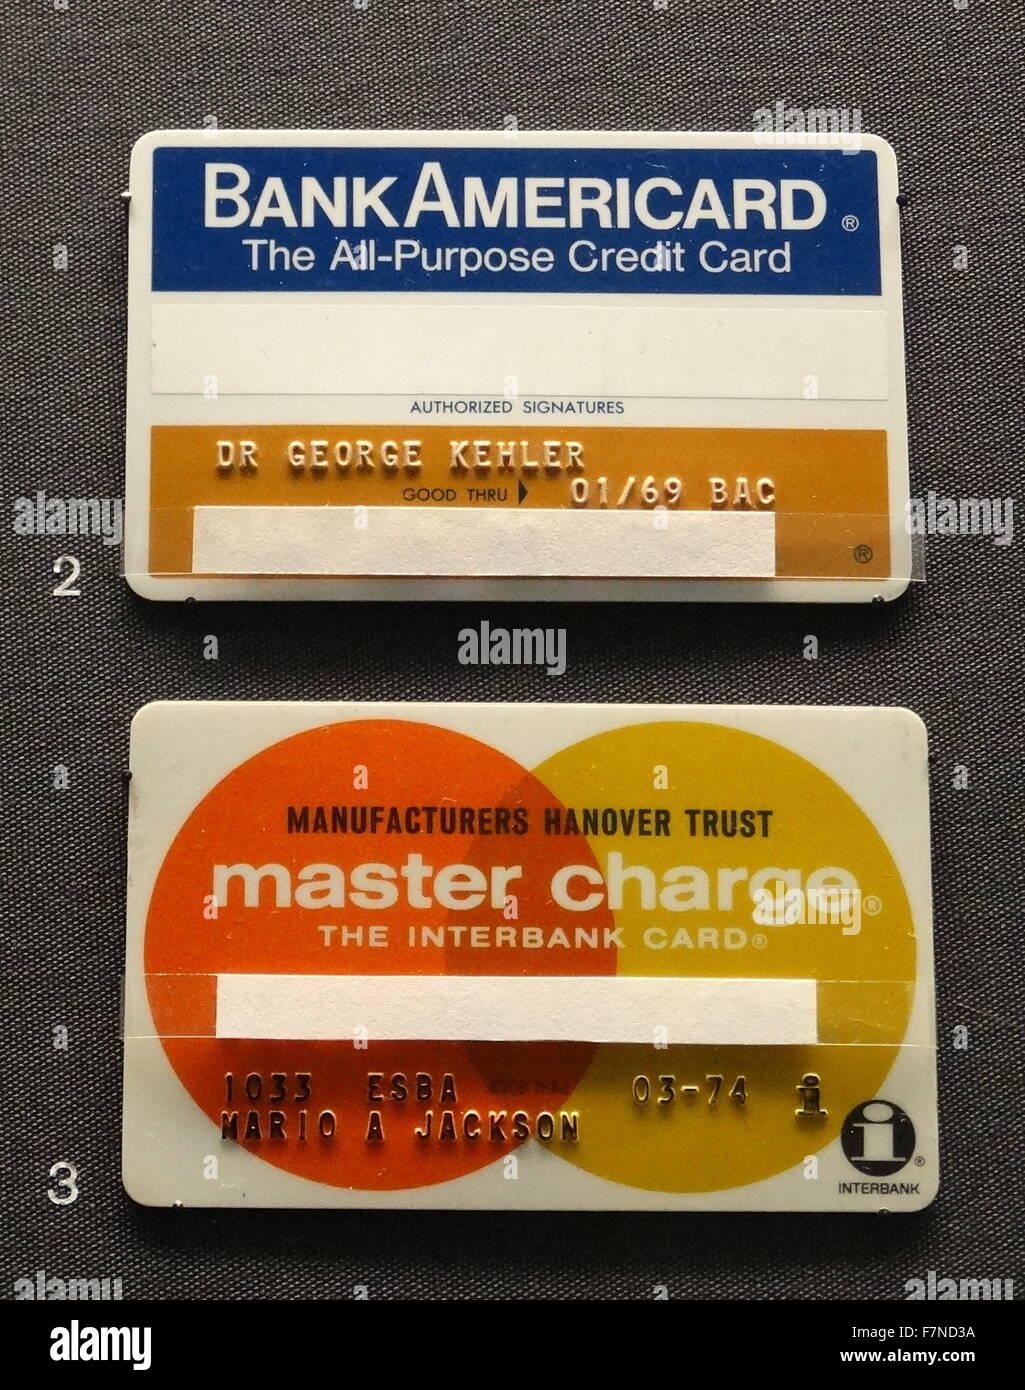 1969 first all-purpose credit card, Bank Americard (later Visa Stock Photo: 90825710 - Alamy